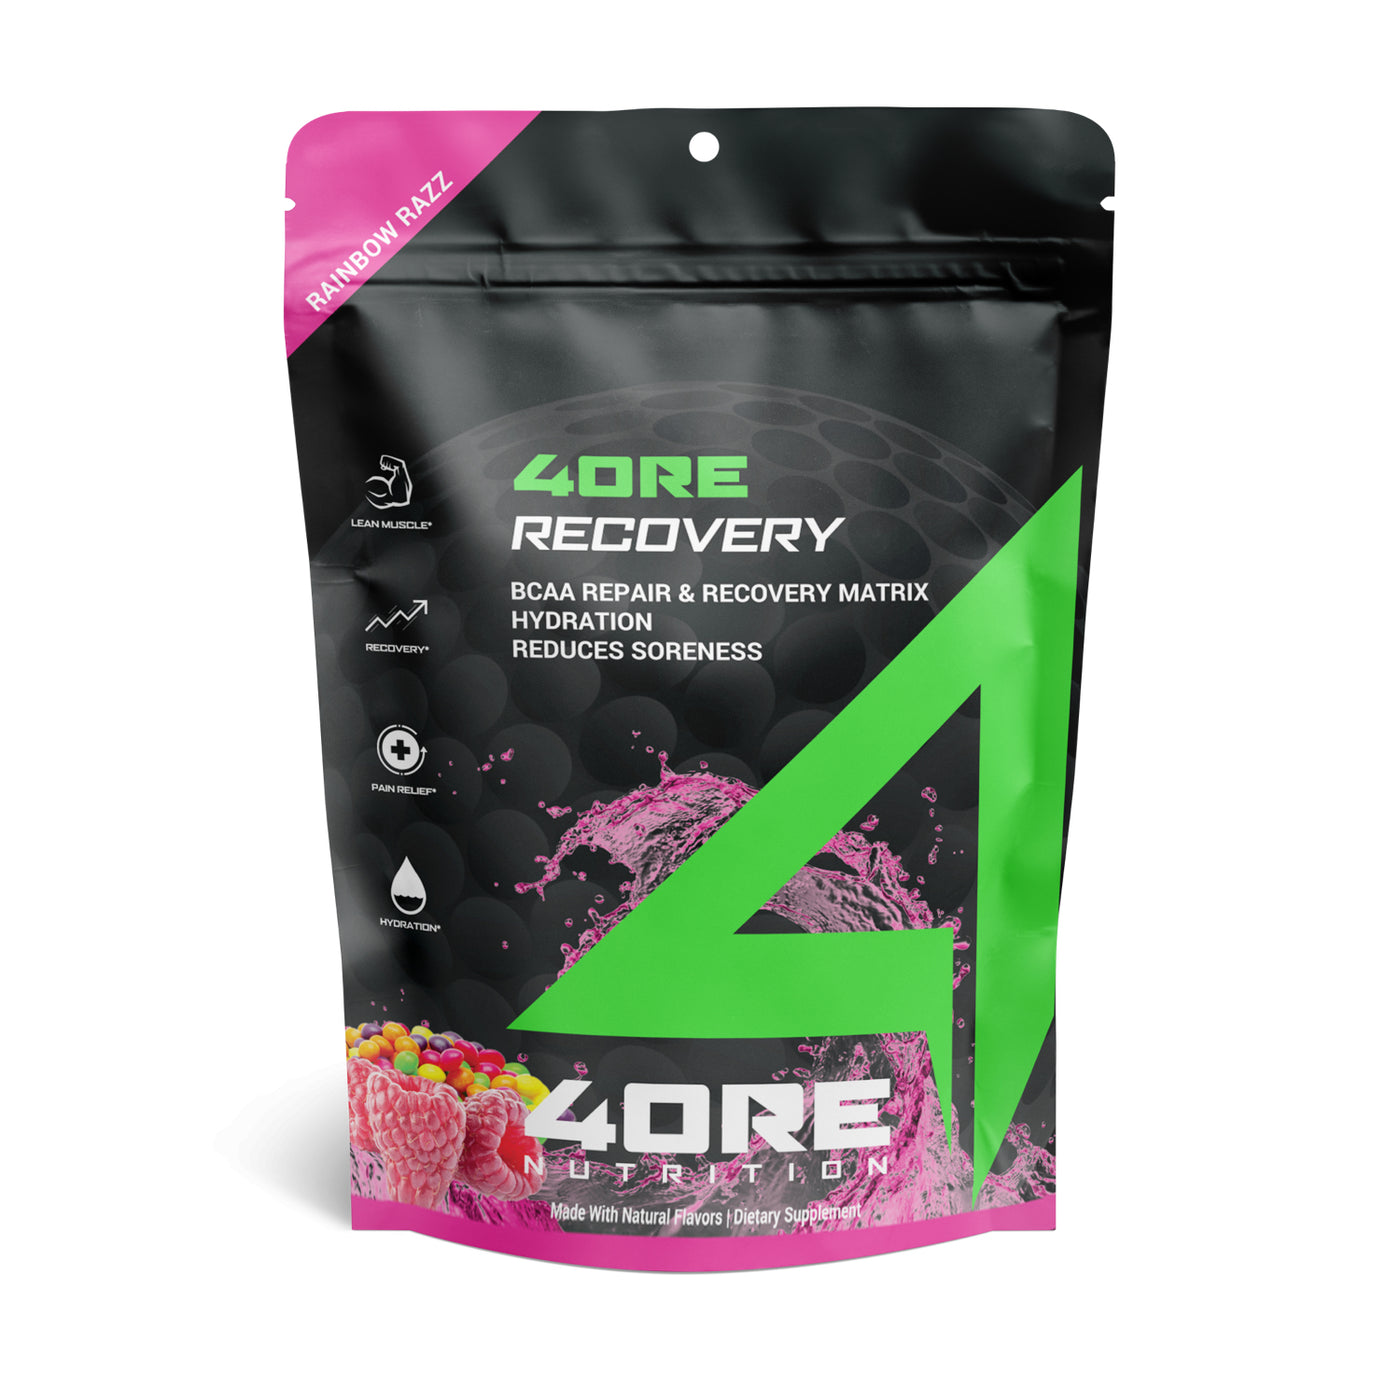 4ORE RECOVERY - 4ORE NUTRITION 4ORE RECOVERY Rainbow Razz 20 Serving Pouch (5873144234145)